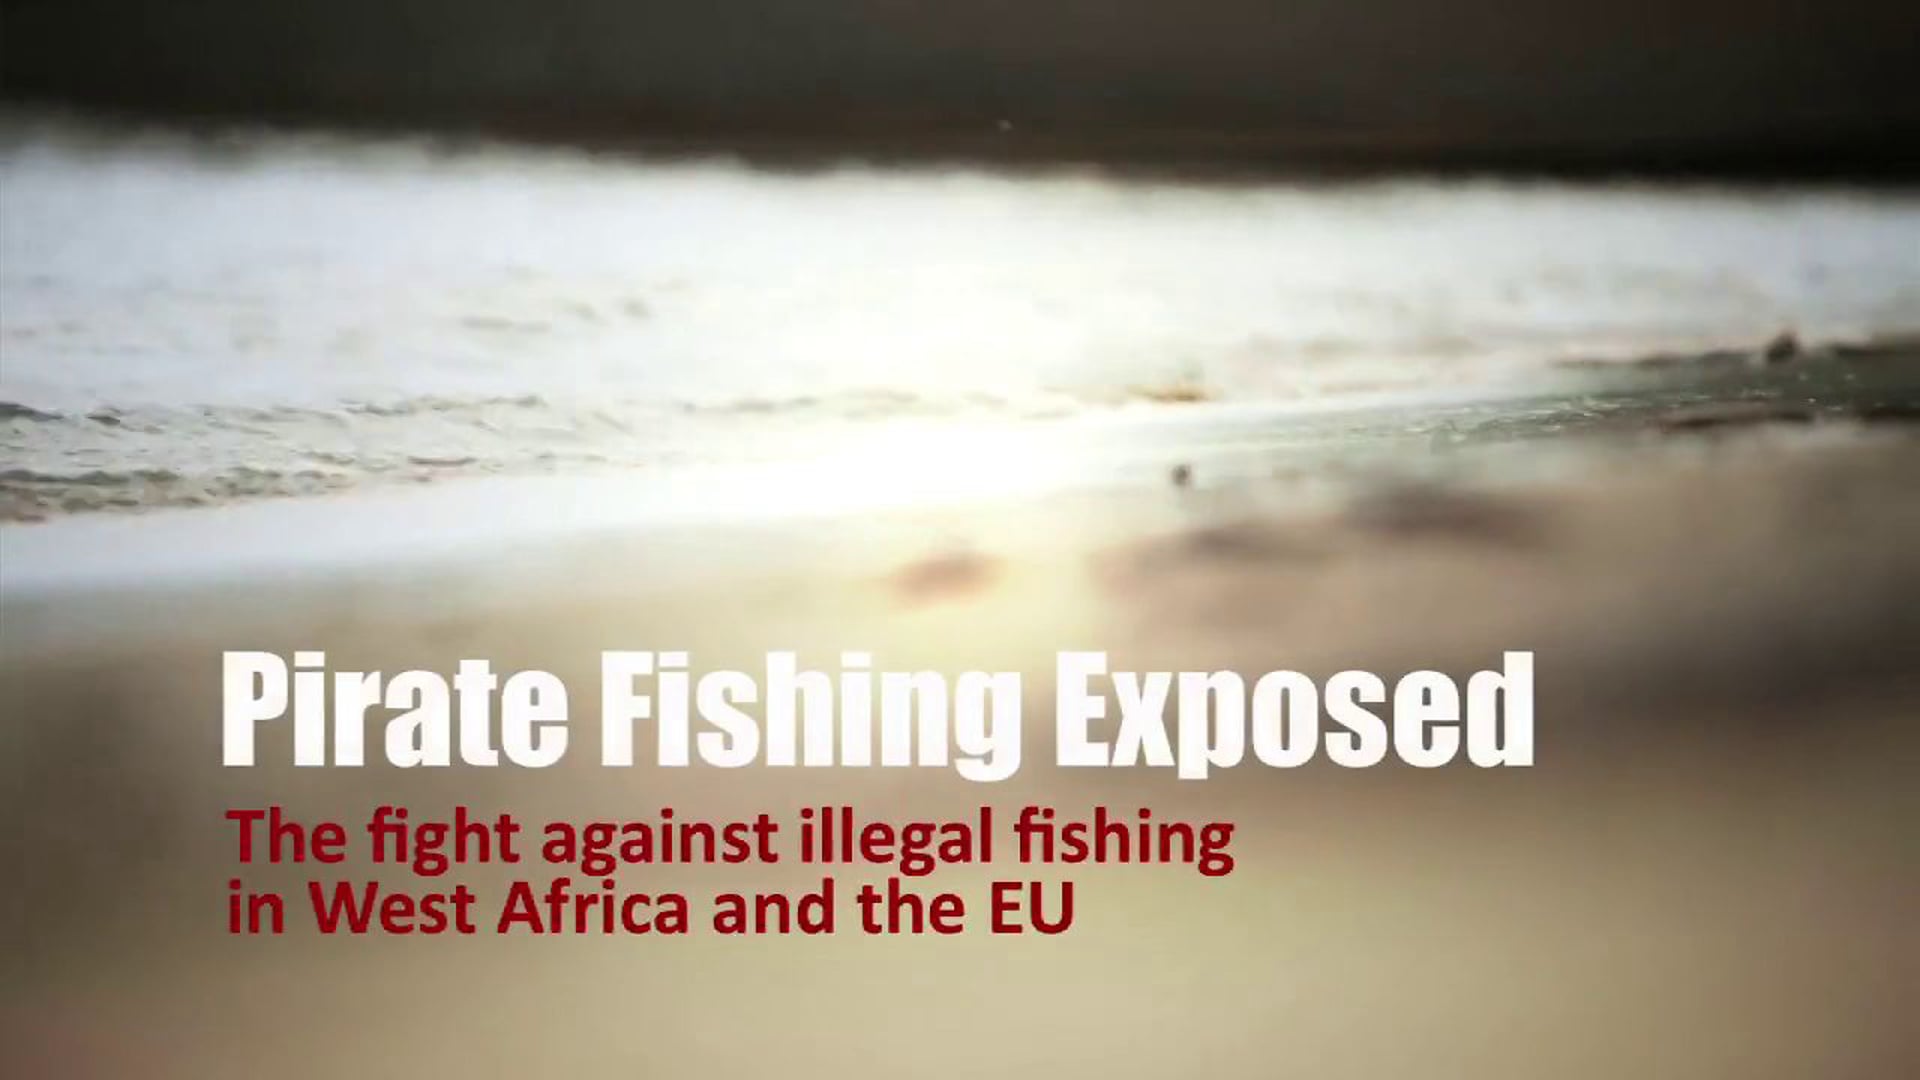 Pirate Fishing Exposed - The Fight against Illegal Fishing in West Africa and the EU (4 minute)